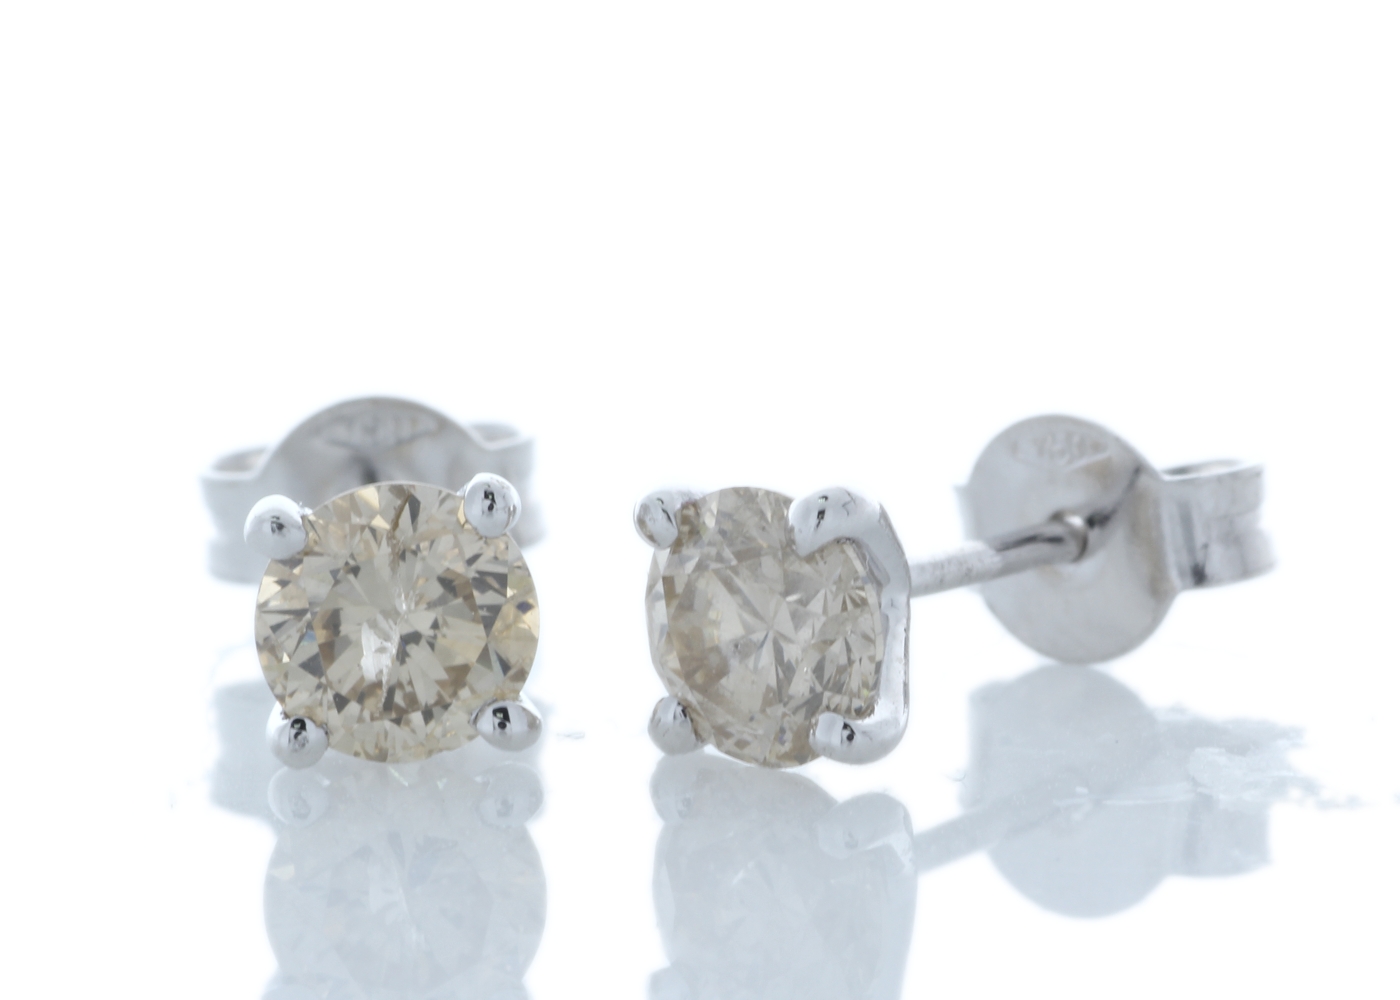 18ct White Gold Single Stone Prong Set Diamond Earring 1.22 Carats - Valued By GIE £6,360.00 - Two - Image 2 of 3